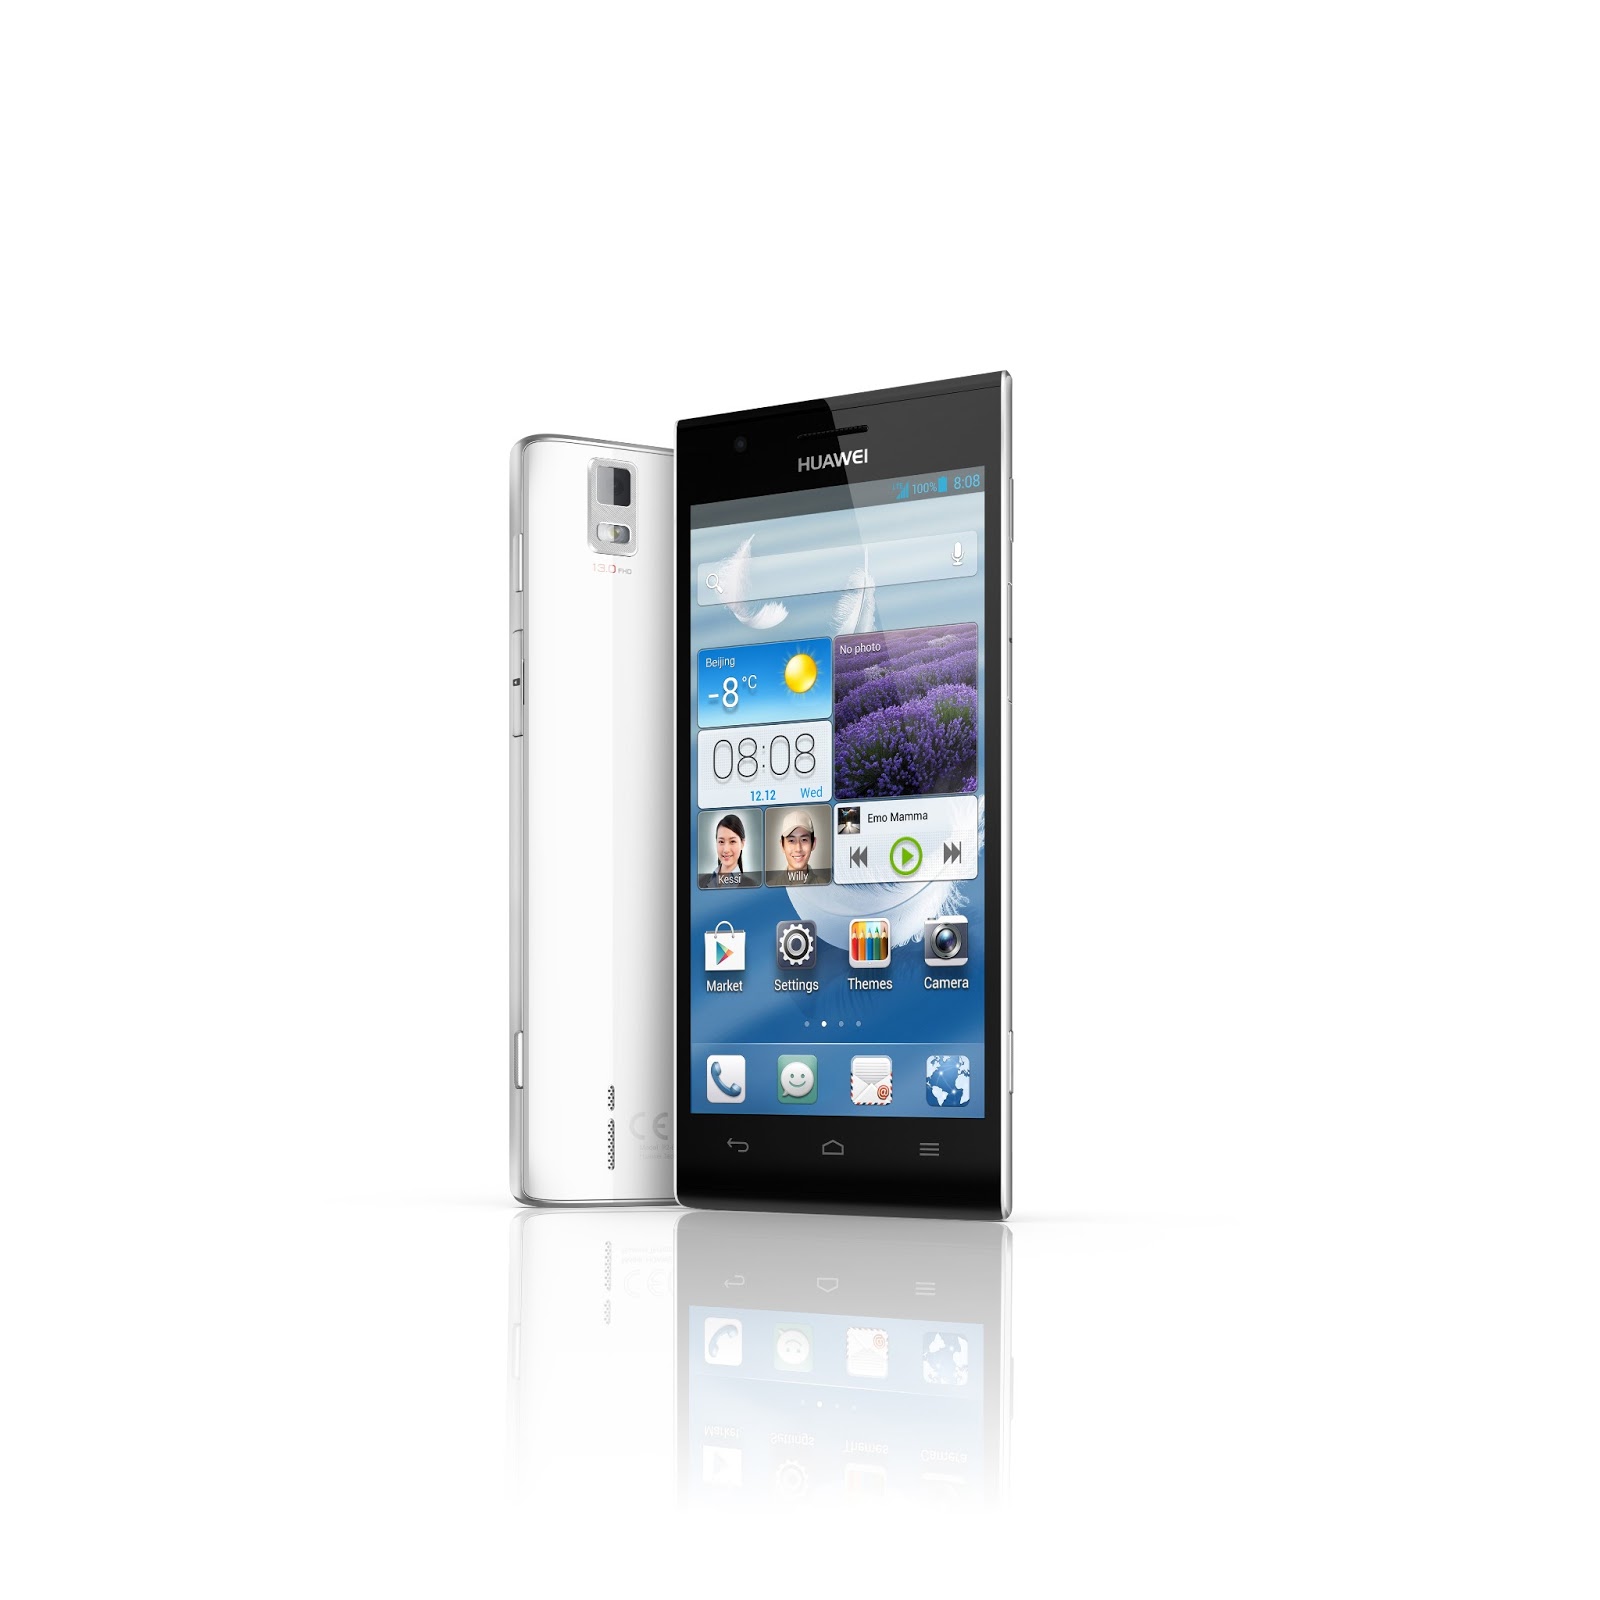 huawei ascend p2 new_android_smartphone_mobile_phone_%C4%B0mages_photos_img_pictures_7